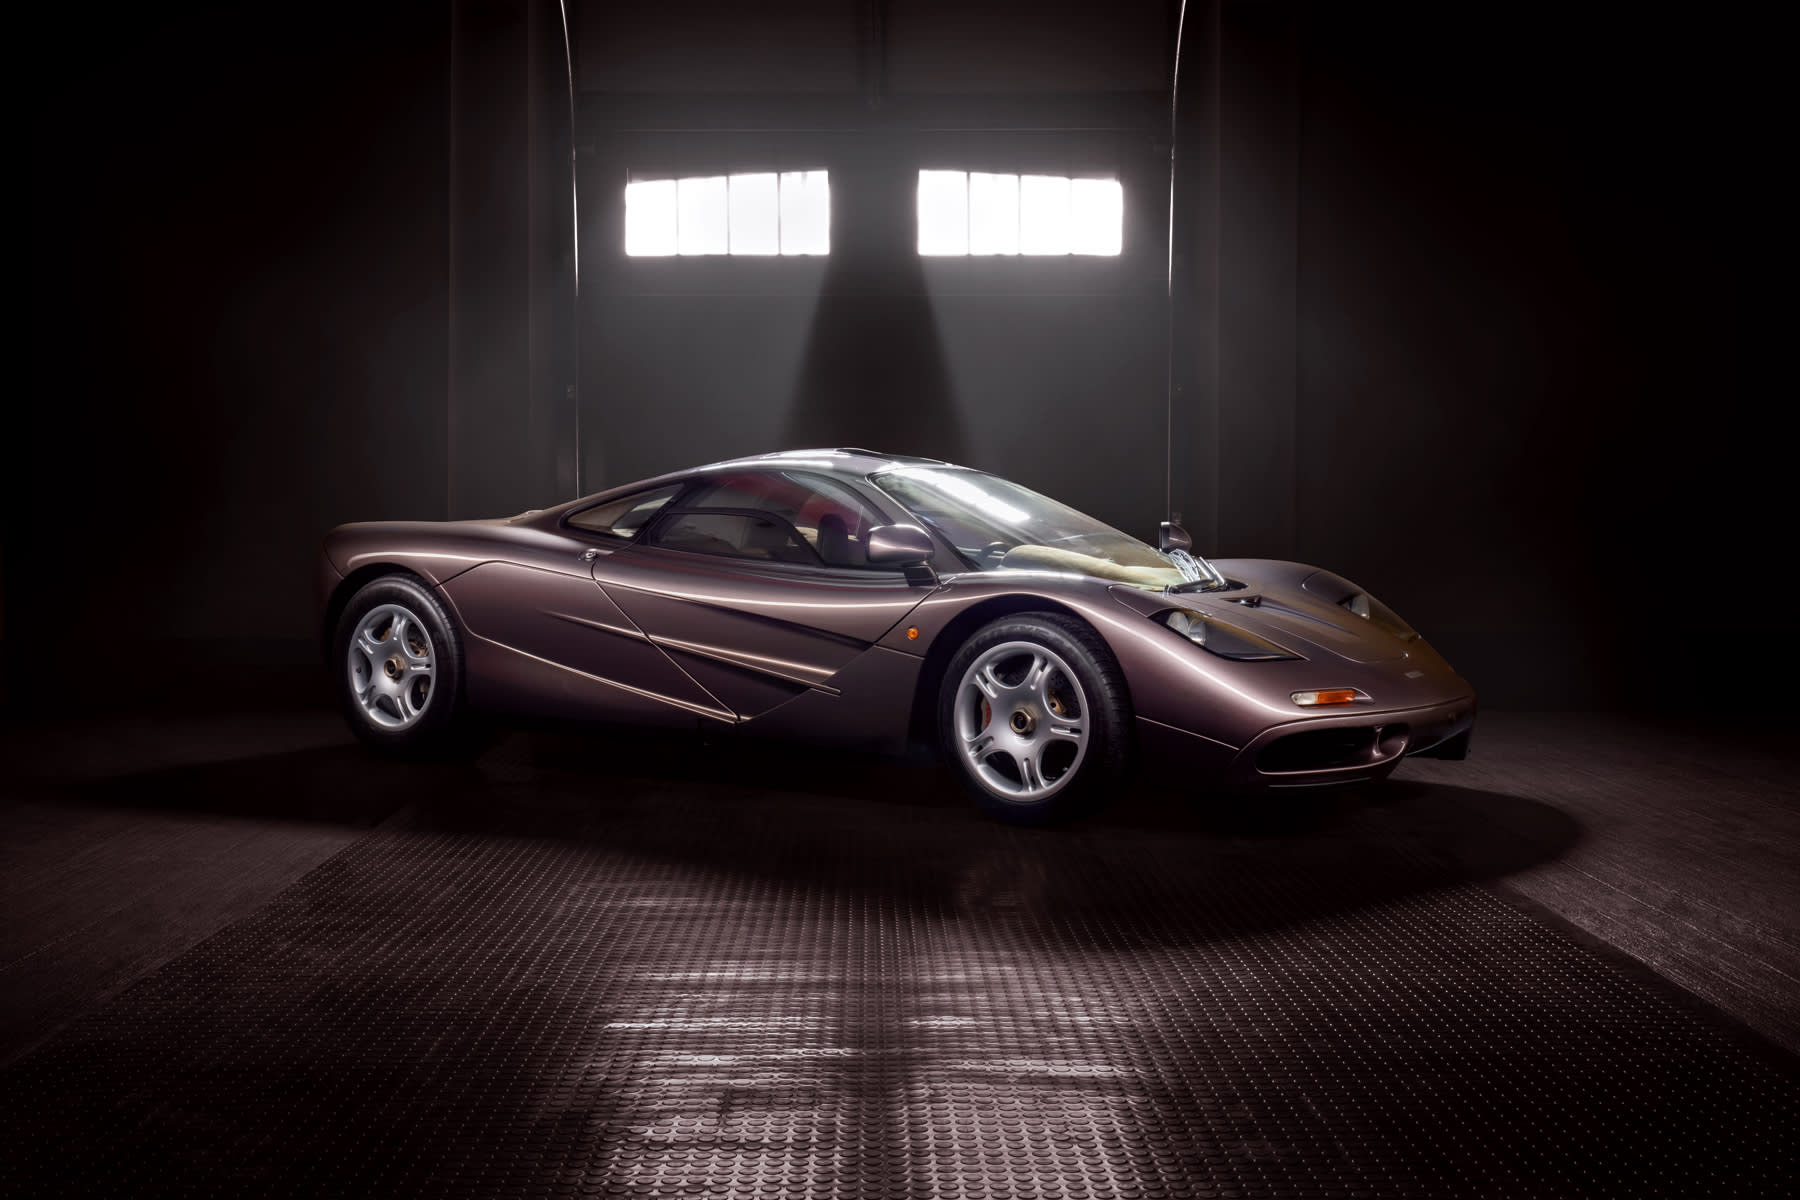 McLaren F1 sells for $20.5 million, the most expensive car auctioned this year